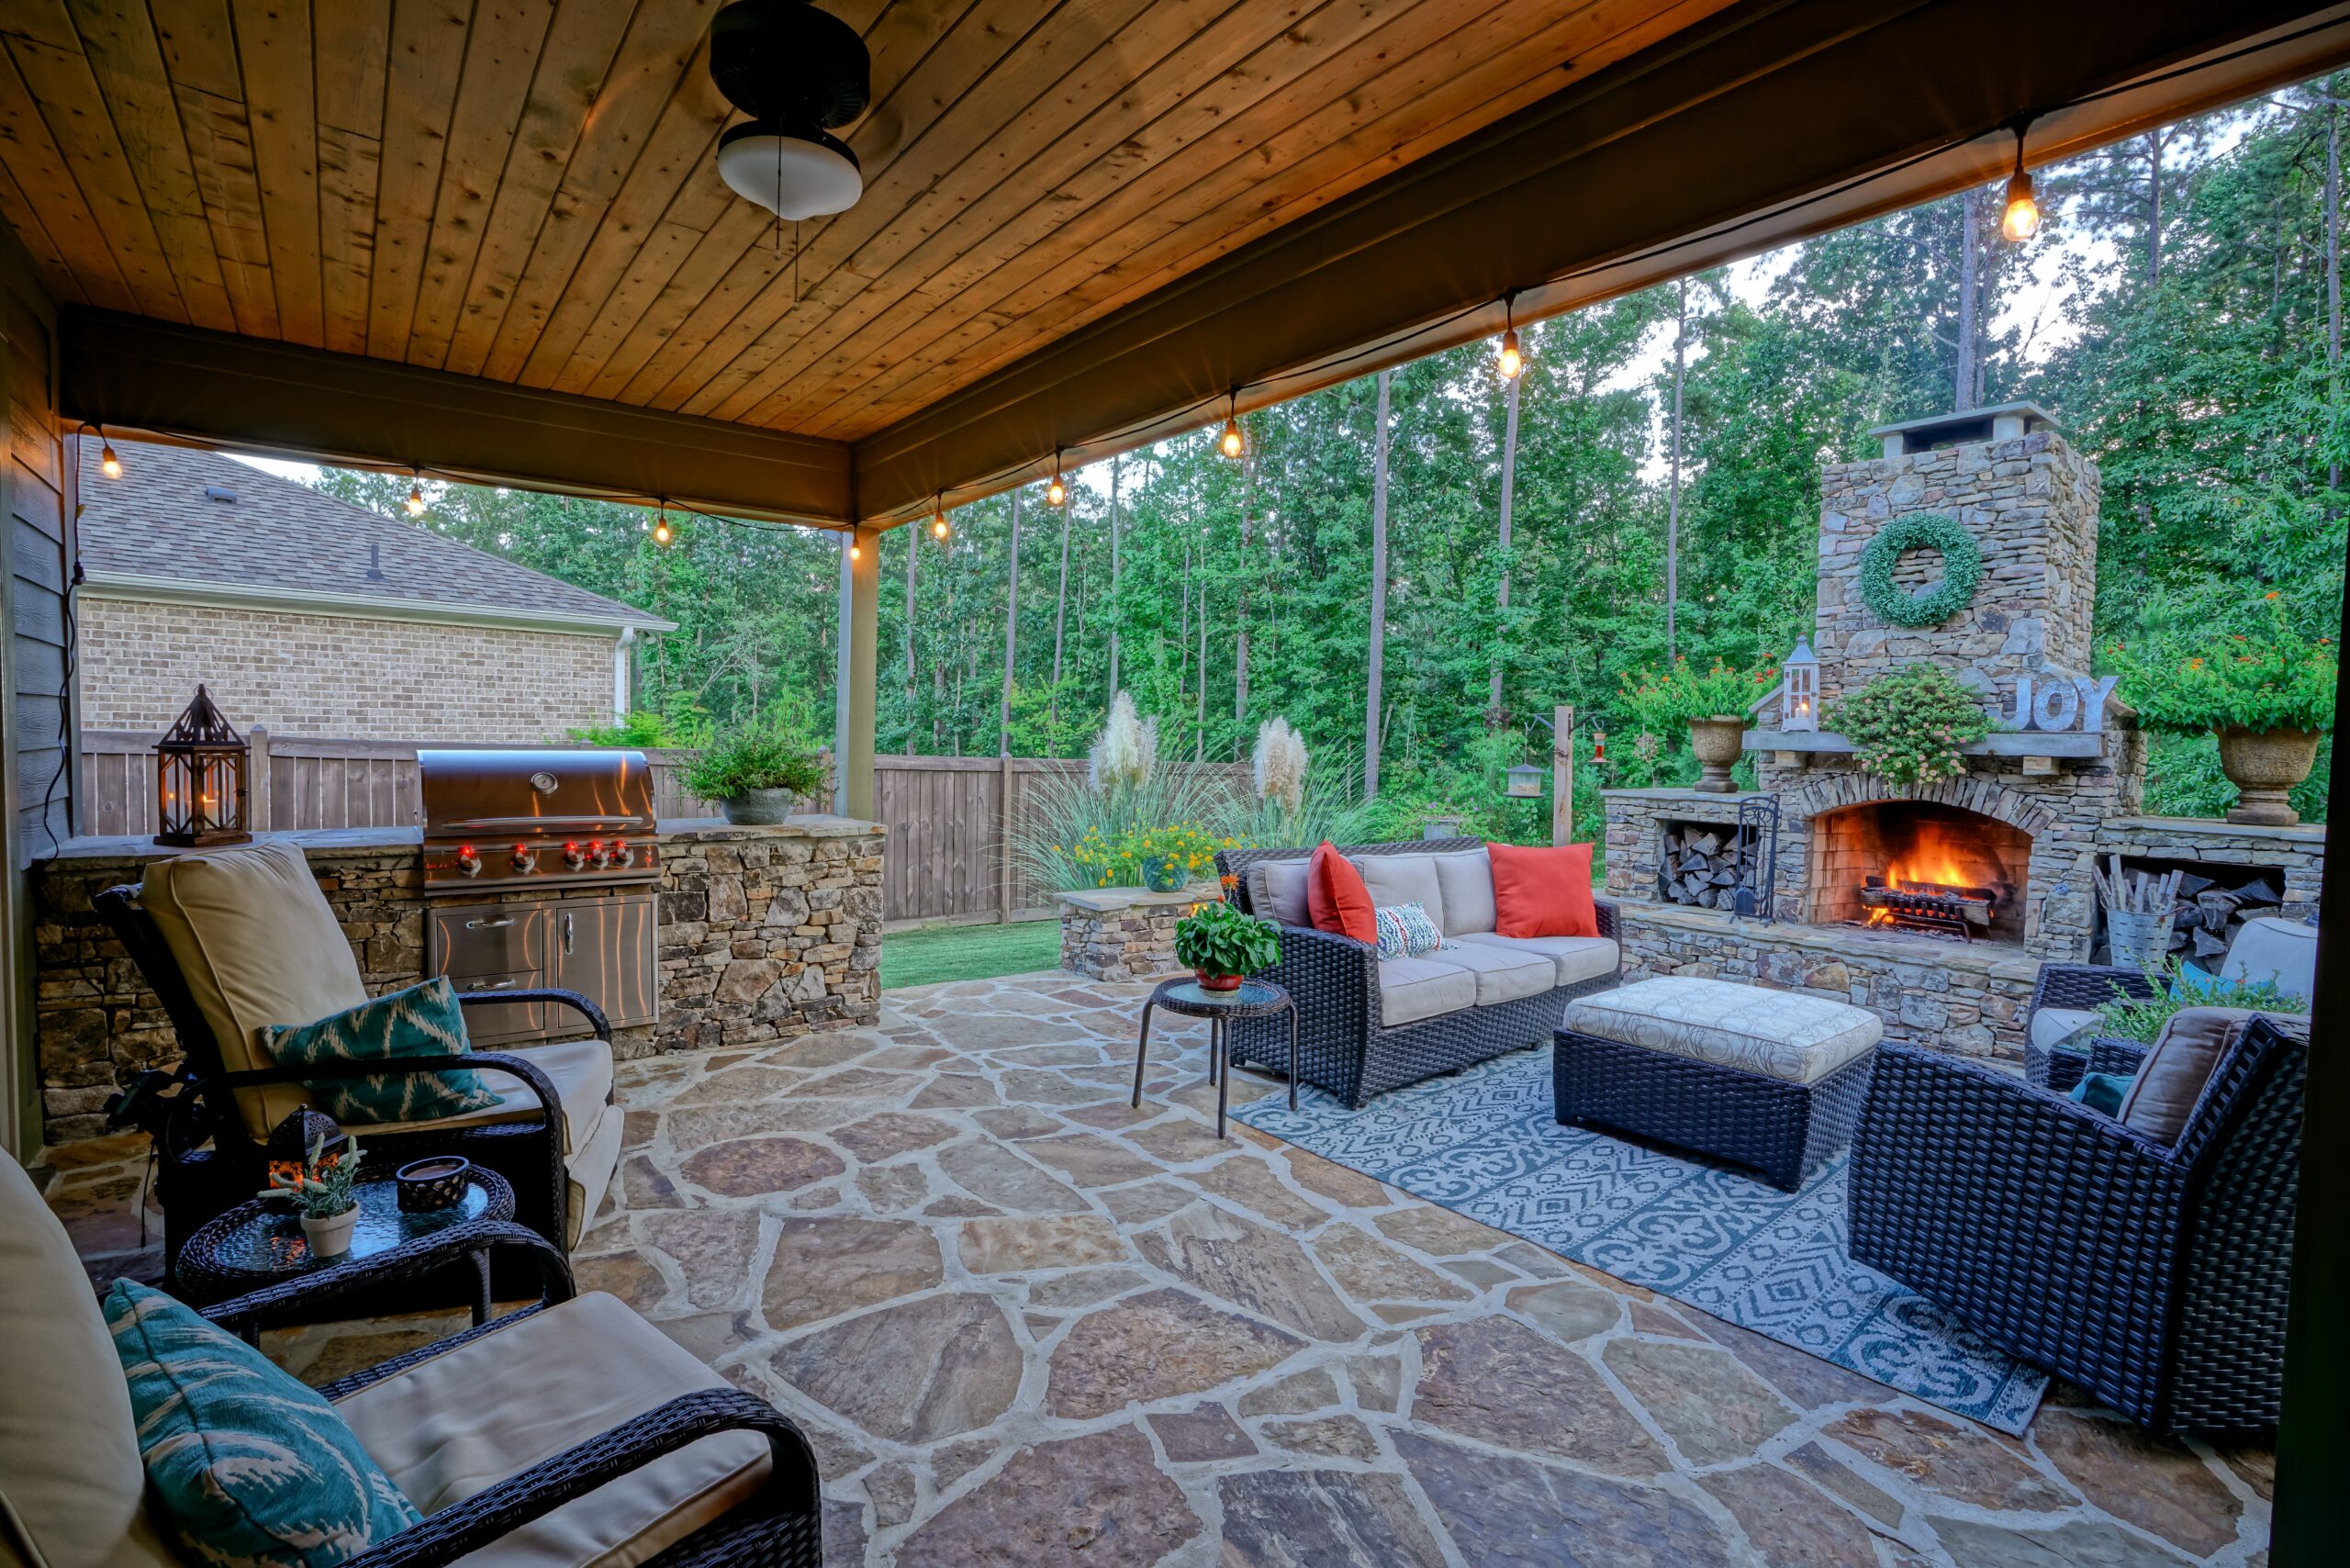 A patio with furniture and a fire place.